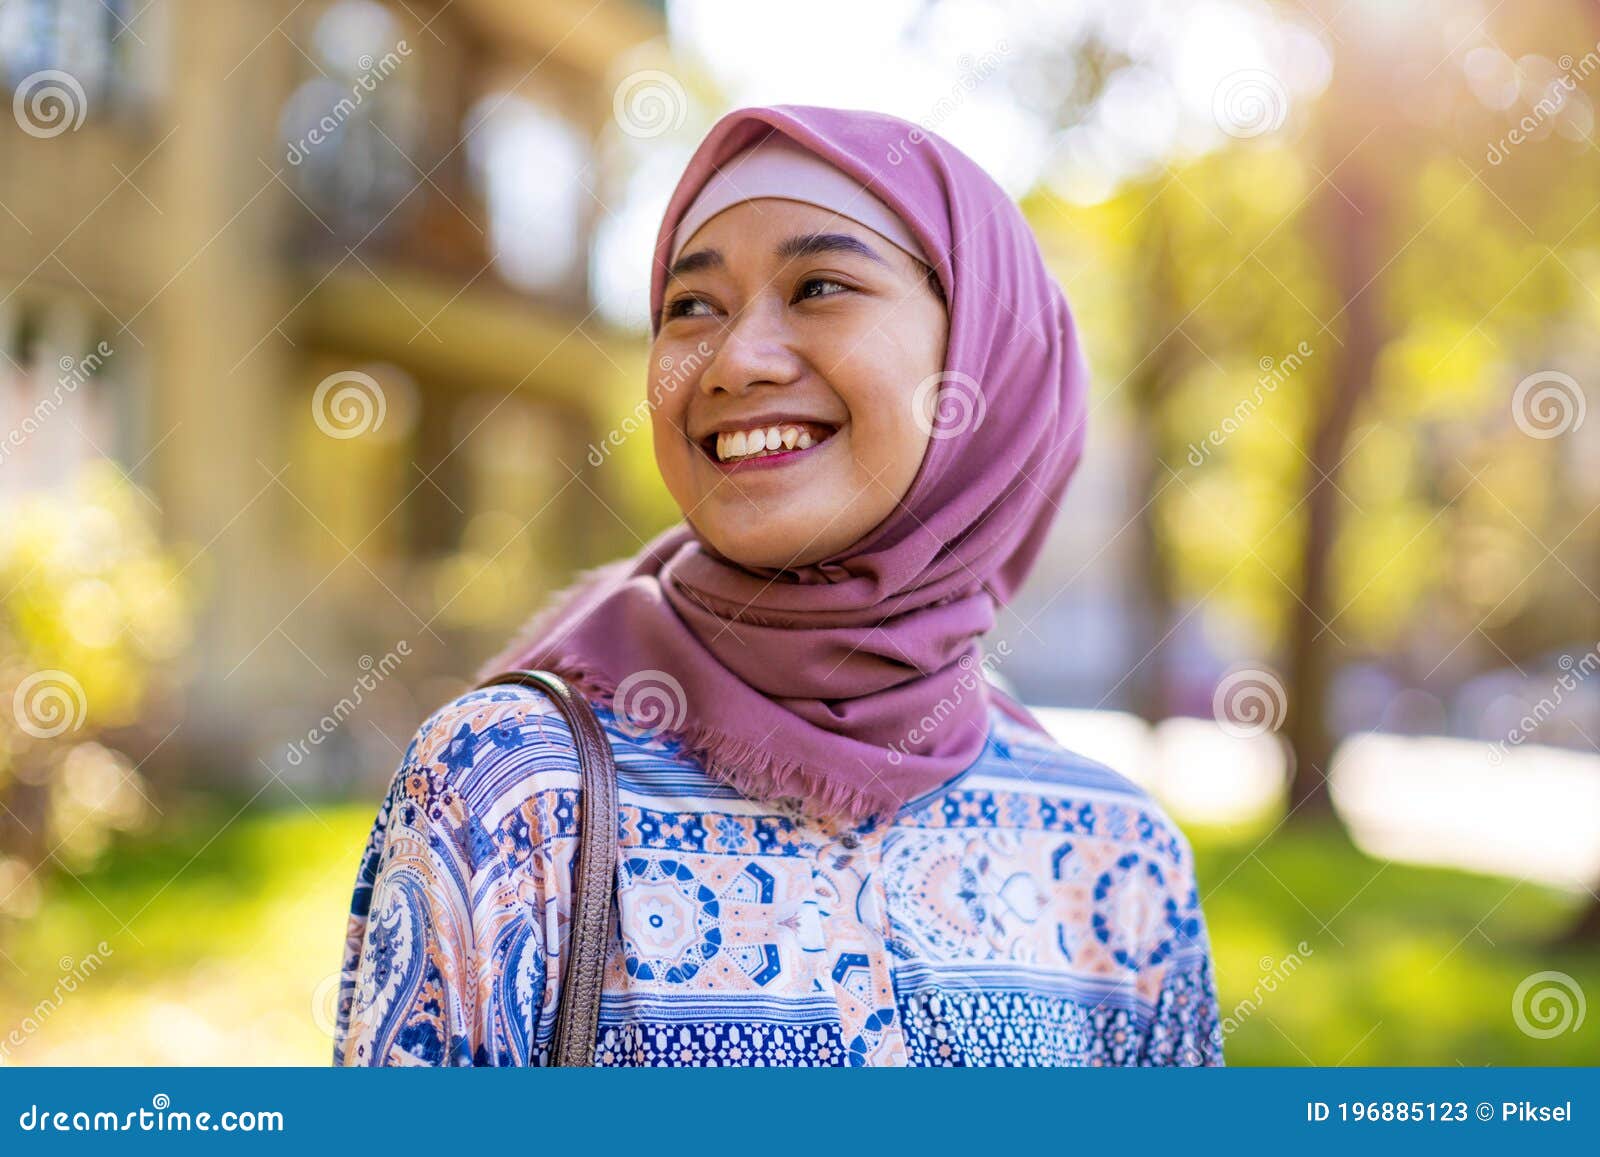 attractive young modern woman wearing a hijab